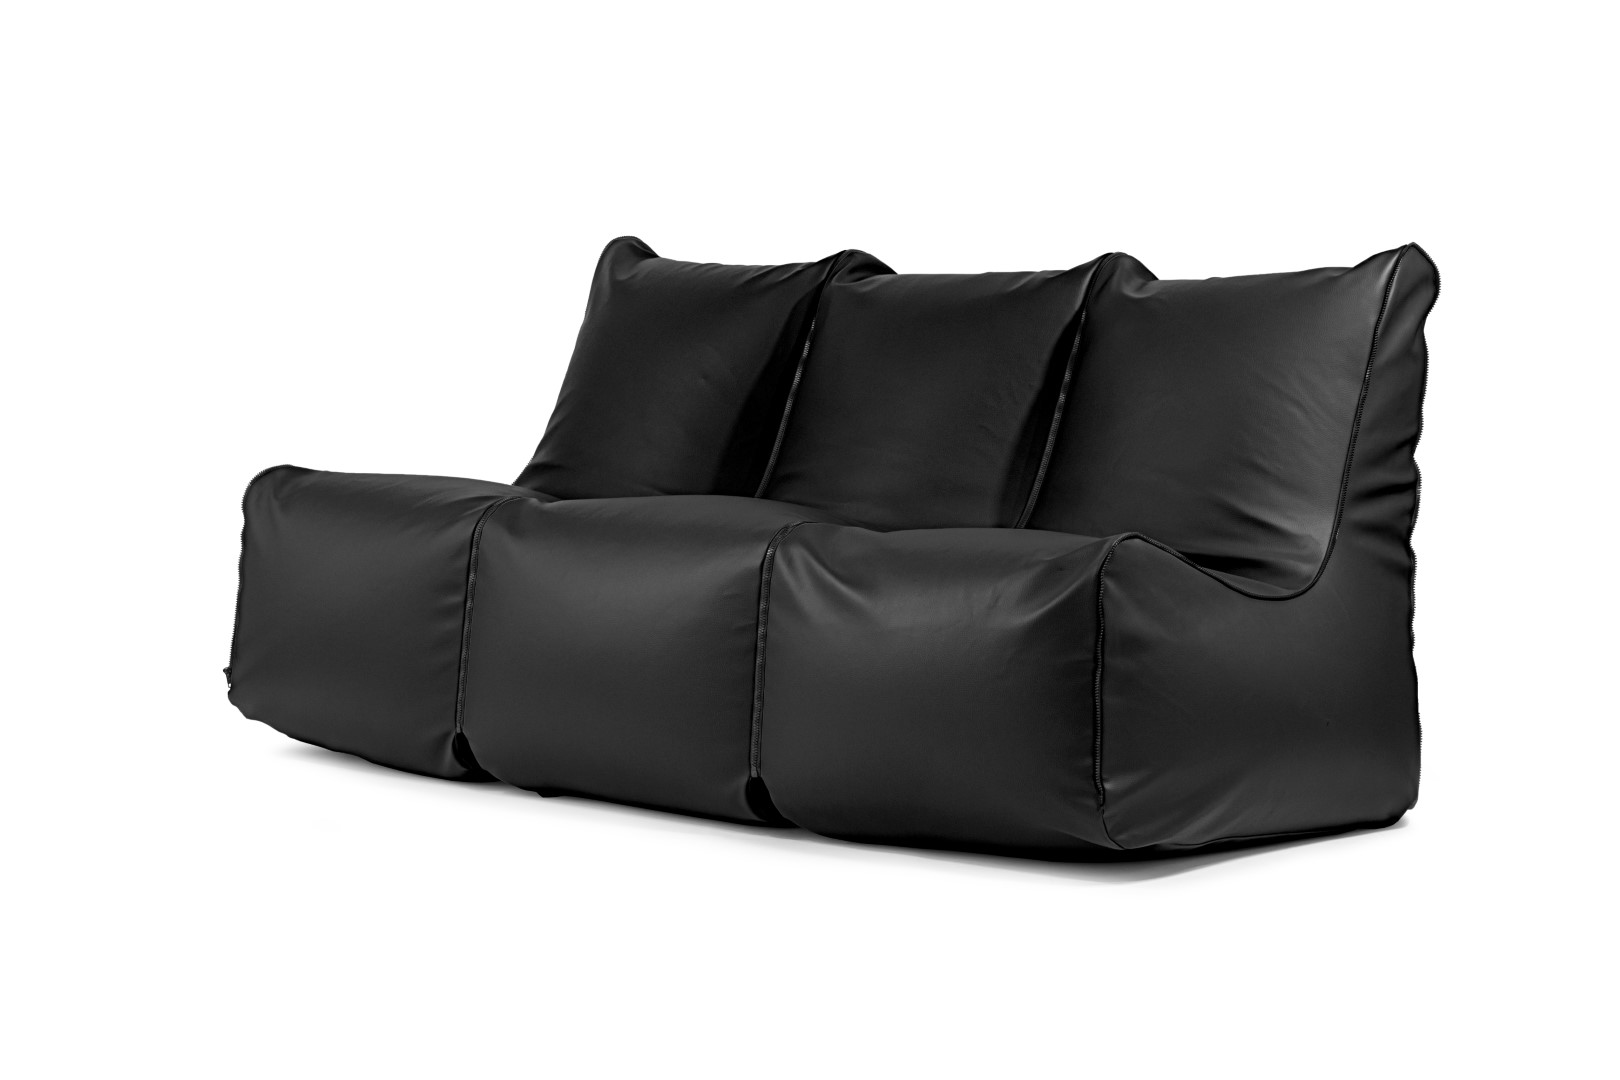 Set Seat Zip 3 Seater Outside Sofa For Three Outside Use